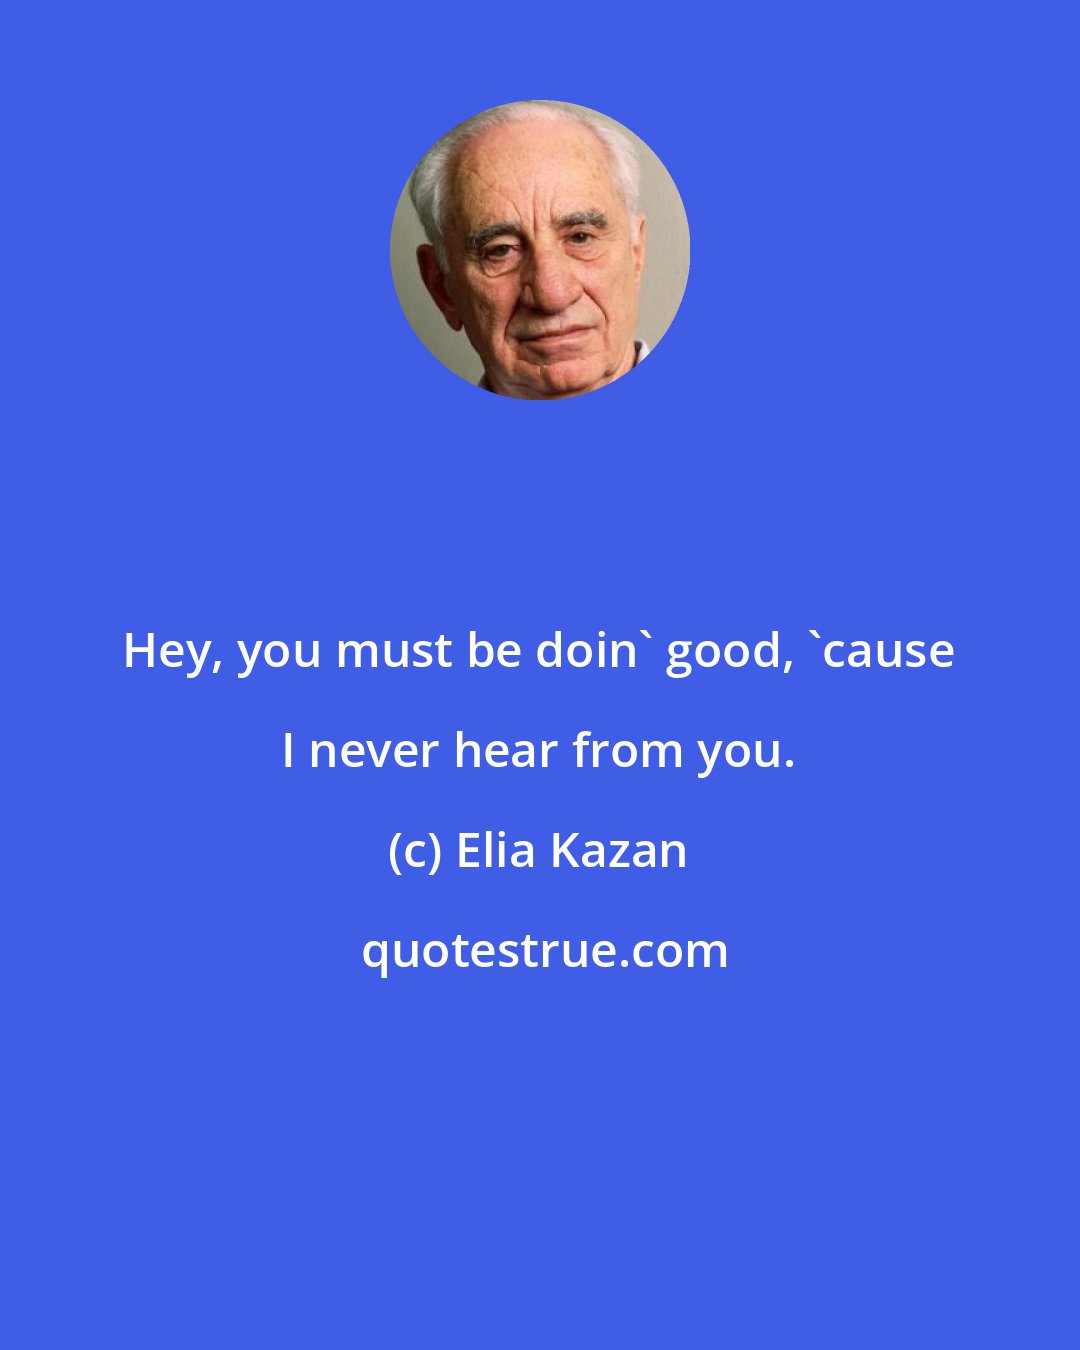 Elia Kazan: Hey, you must be doin' good, 'cause I never hear from you.